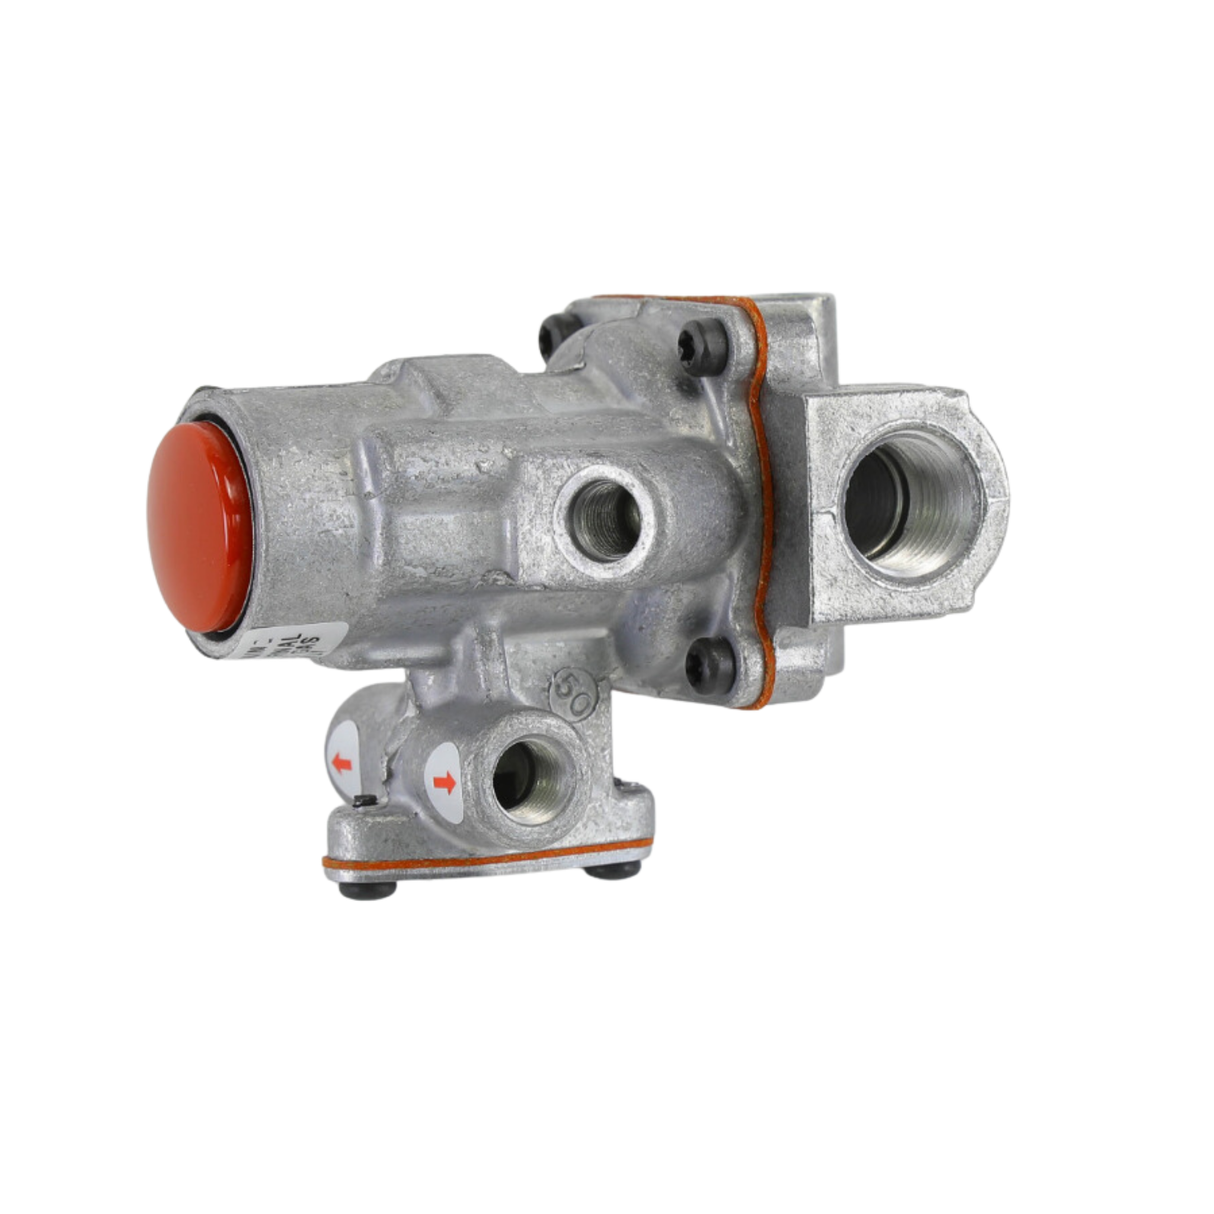 Baso H15AR-4 3/8" NPT Connection Size, Natural and LP Gas up to 0.5 PSI with Two 1/8-27" NPT Pilot Taps right of Inlet, No Pressure Tap, Automatic Shut-Off, Pilot Gas Valve